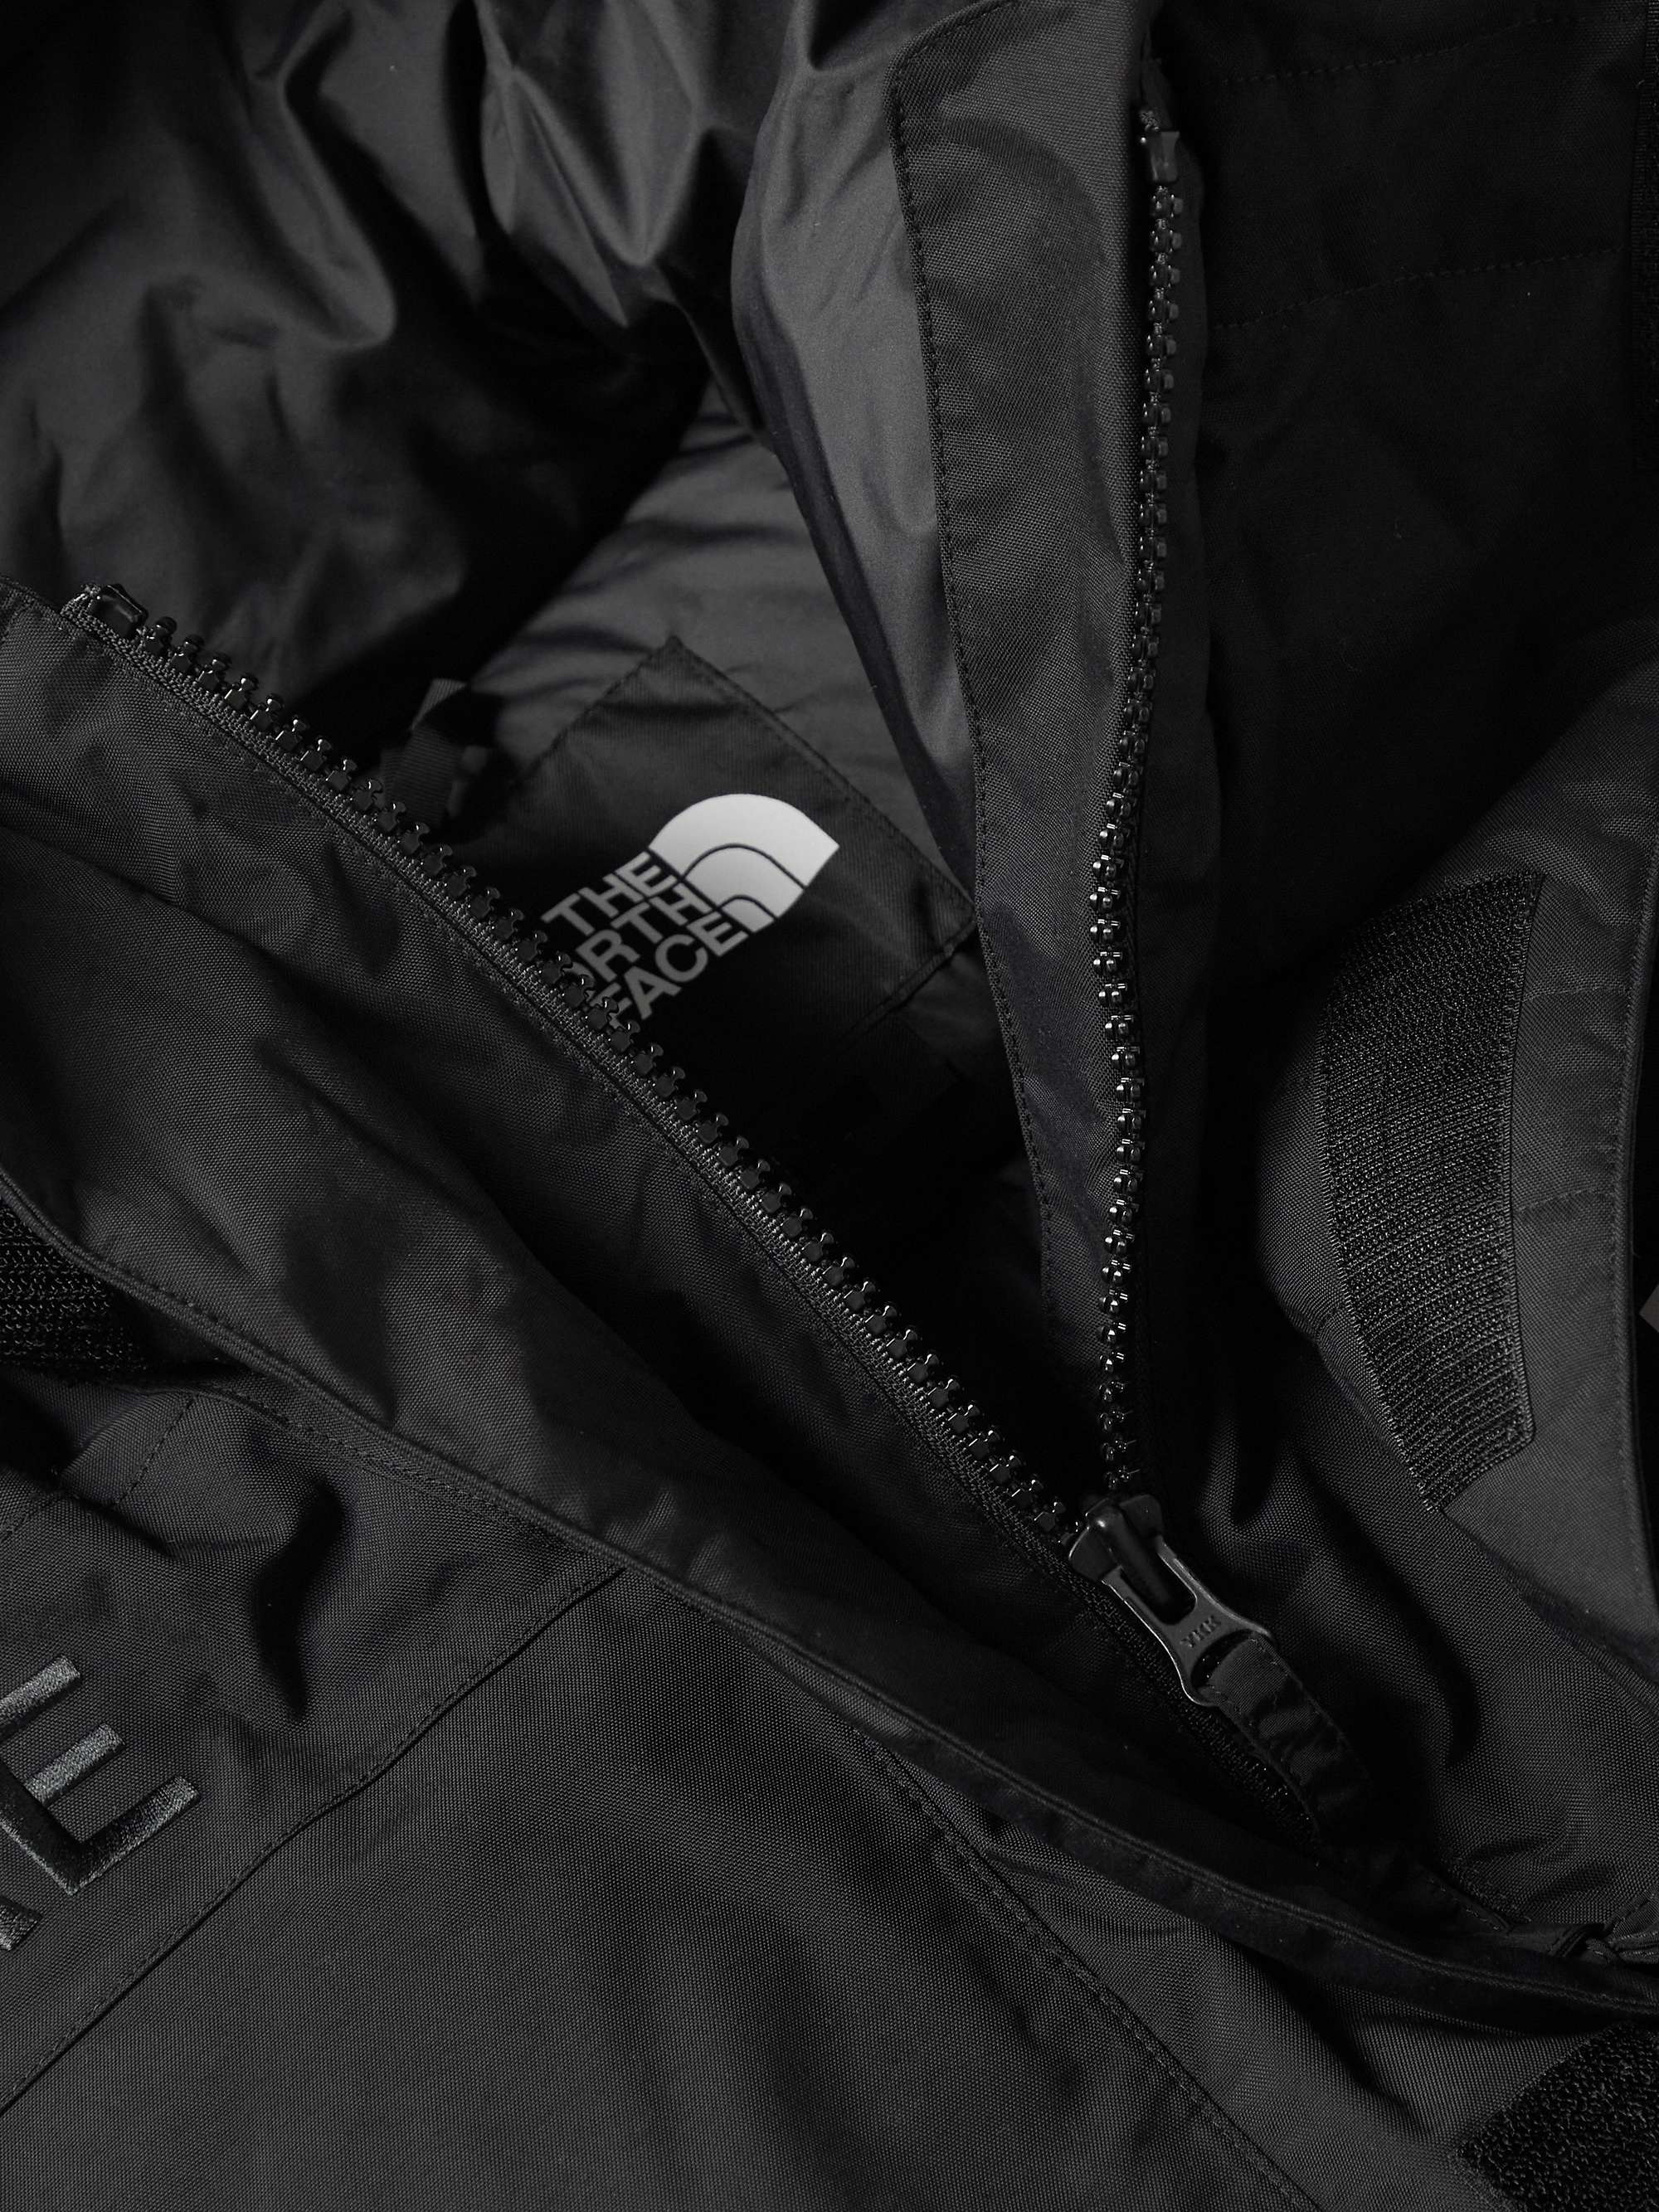 THE NORTH FACE Trans-Antarctica Expedition DryVent Hooded Down Parka